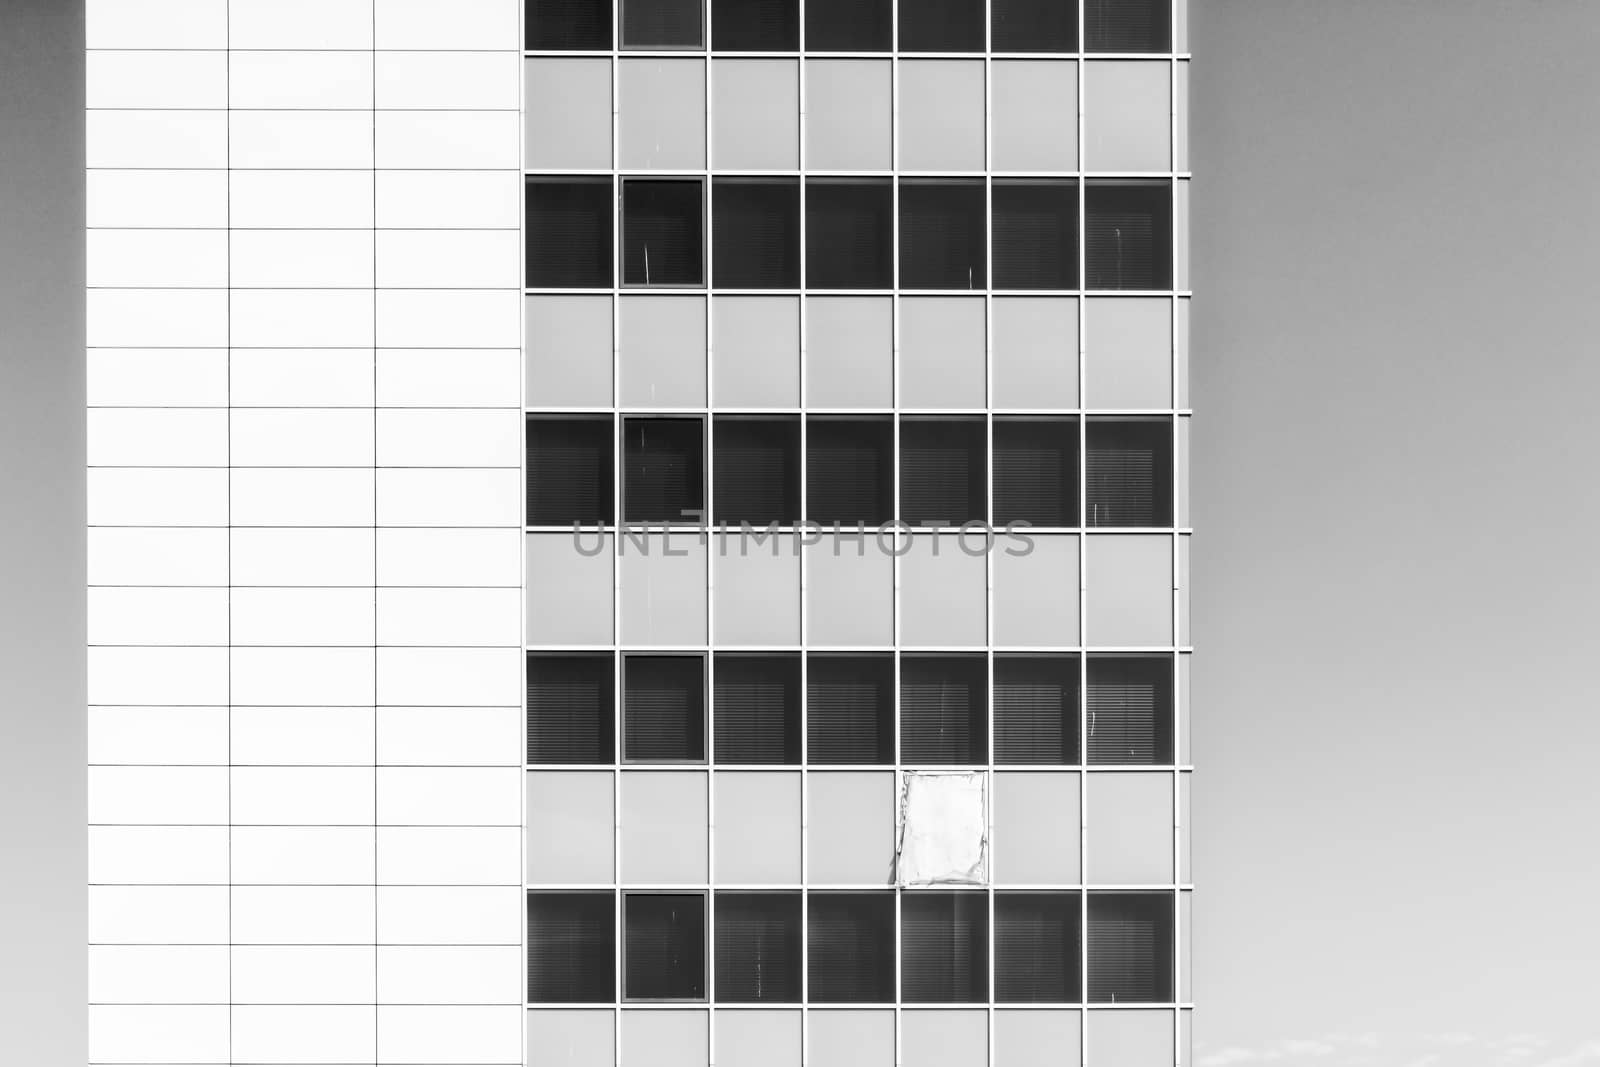 Architectural photograph of a building in New York City